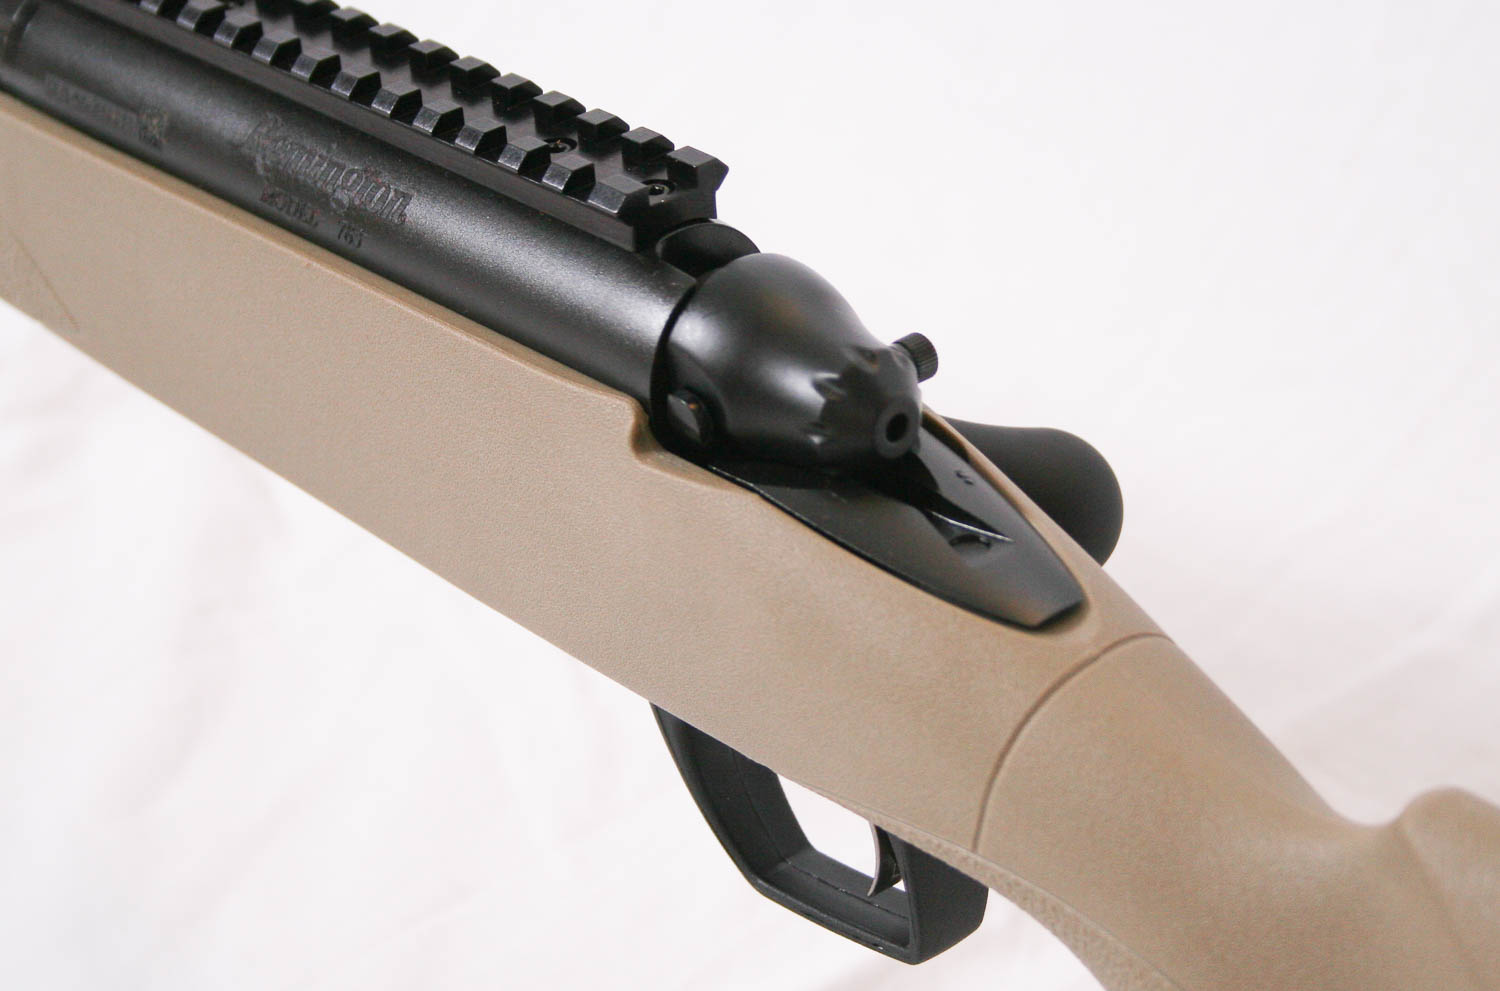 REMINGTON 783 SYNTHETIC HEAVY BARREL - FULL REVIEW - Sniper Central.